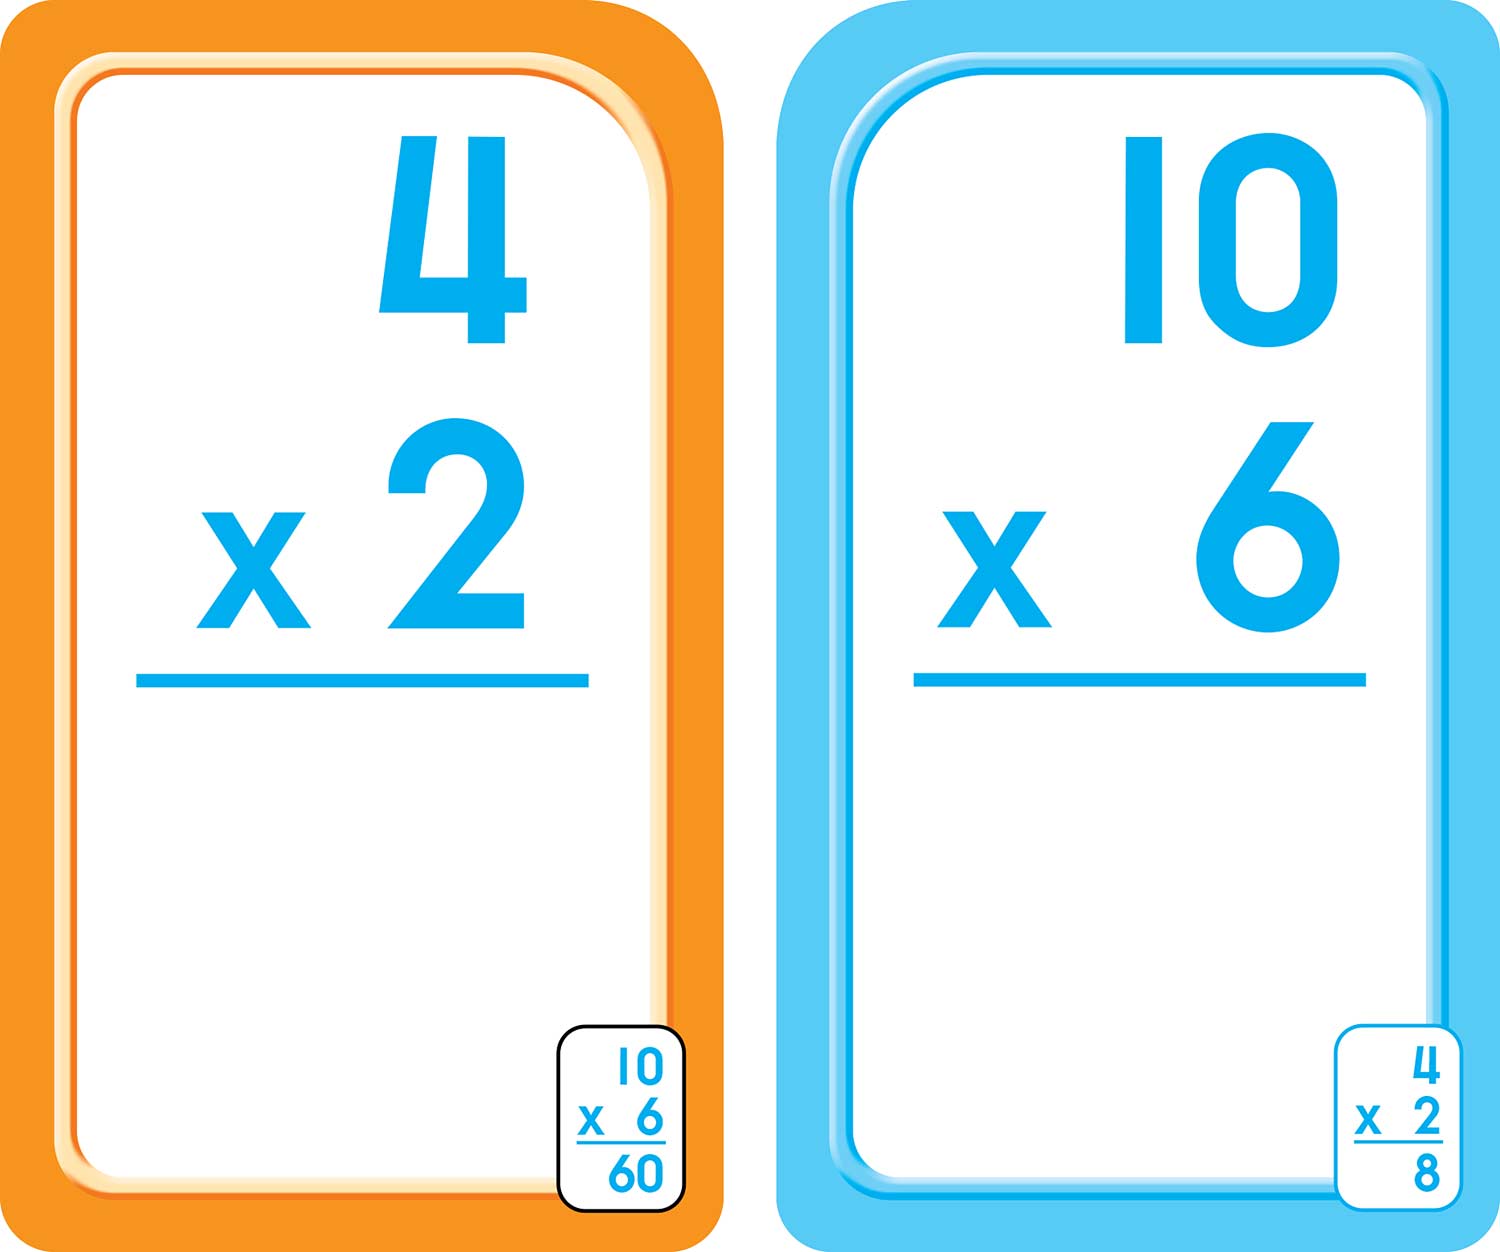 3rd-4th-and-5th-grade-multiplication-flash-cards-0-12-raff-and-friends